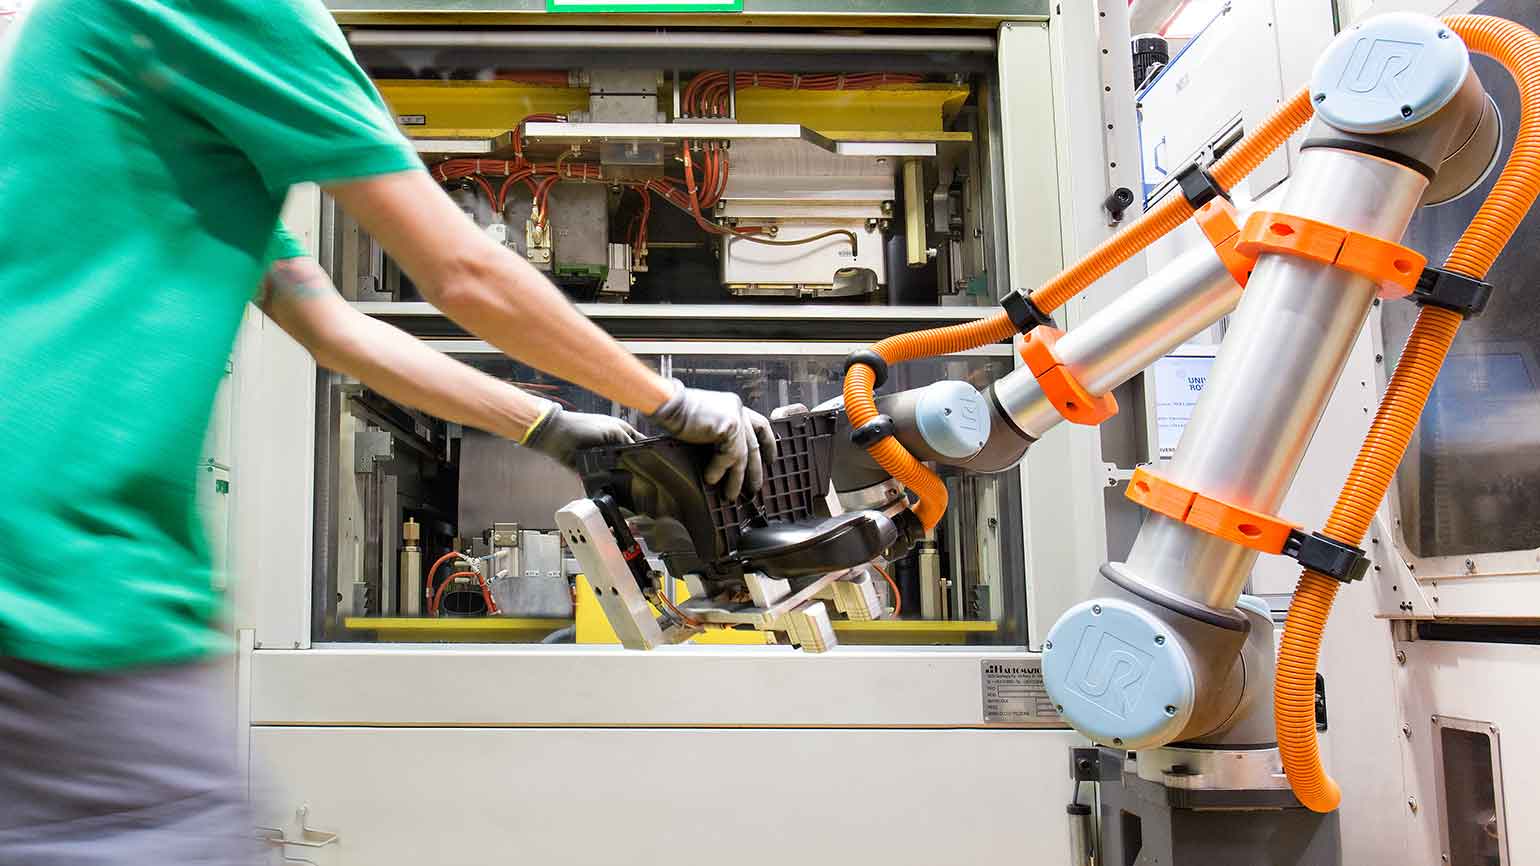 Safety sensors create harmonized workspaces for robots and humans